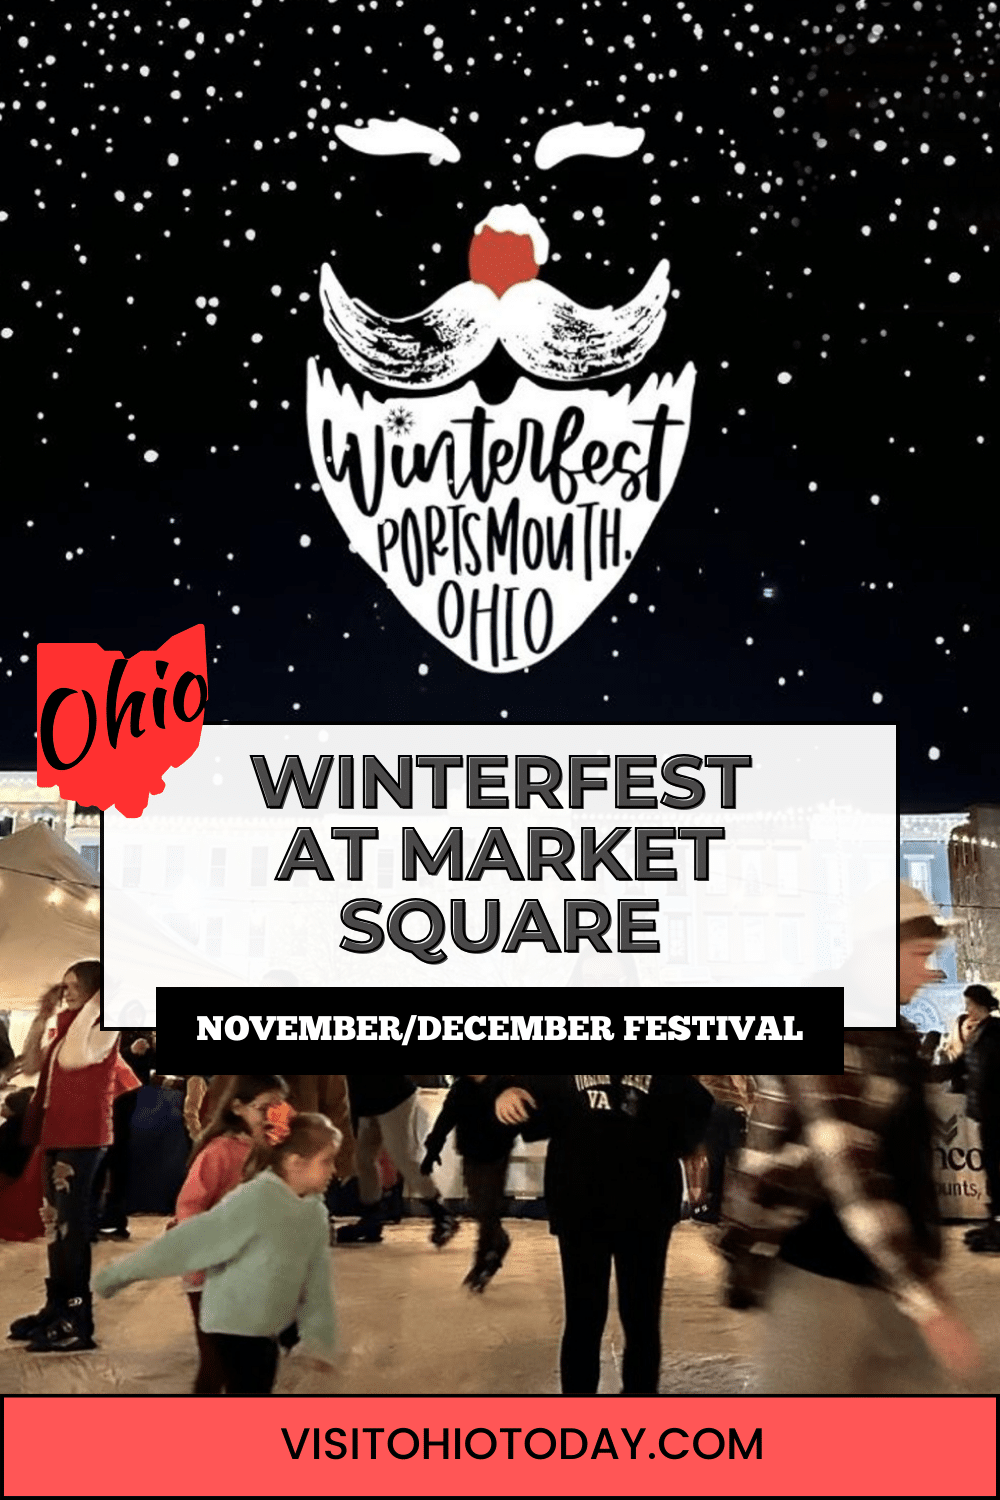 The Winterfest at Market Square is held from 16 November to 3 December 2023 at Boneyfiddle’s Market Square, Portsmouth, Ohio.